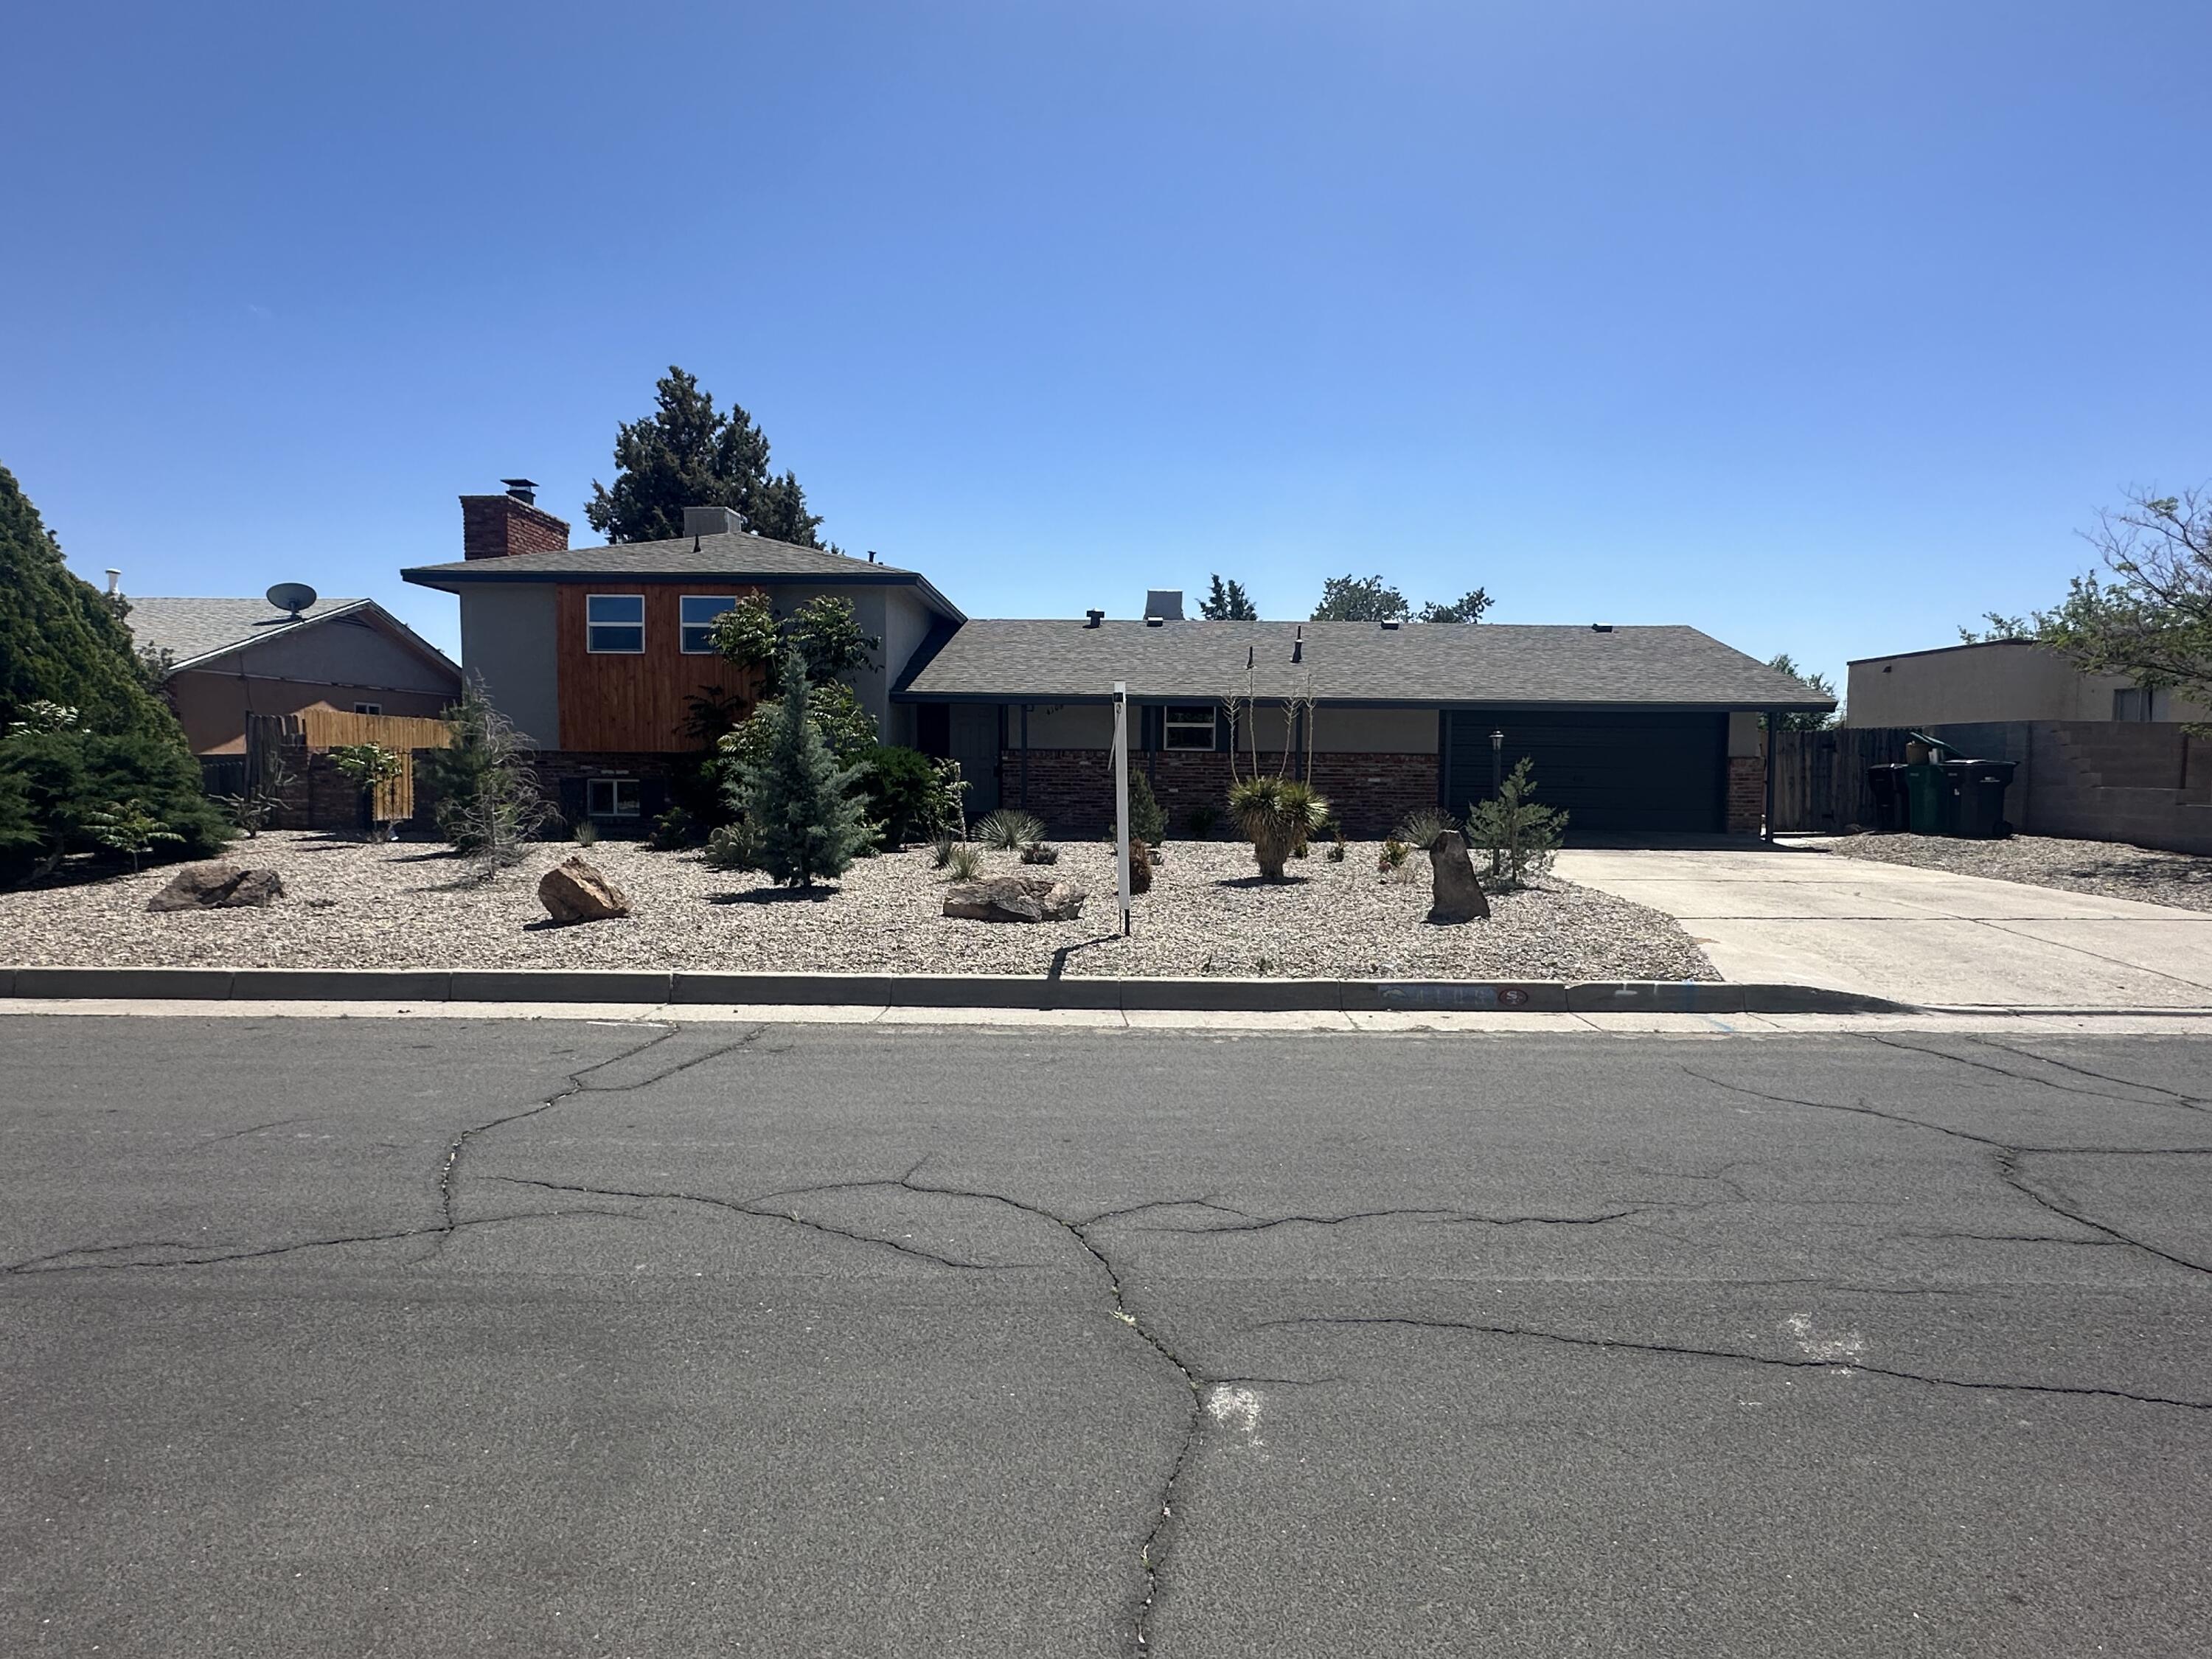 **SOLD FURNISHED**Wonderful split level floorplan in Rio Rancho.  This home has been updated and is move in ready! This lovely home offers 2 Living areas with an owners suite and a second mini master on the bottom floor. Updates in 2019 include:  Roof, windows, swamp coolers, paint, flooring, carpet, stainless steel appliances convey, kitchen has been updated and includes granite with tile backsplash and custom cabinets. Bathrooms have been updated and include custom vanities and beautiful tile backsplash in the showers. Conveniently located in Rio Rancho this lovely home includes a great size back yard!